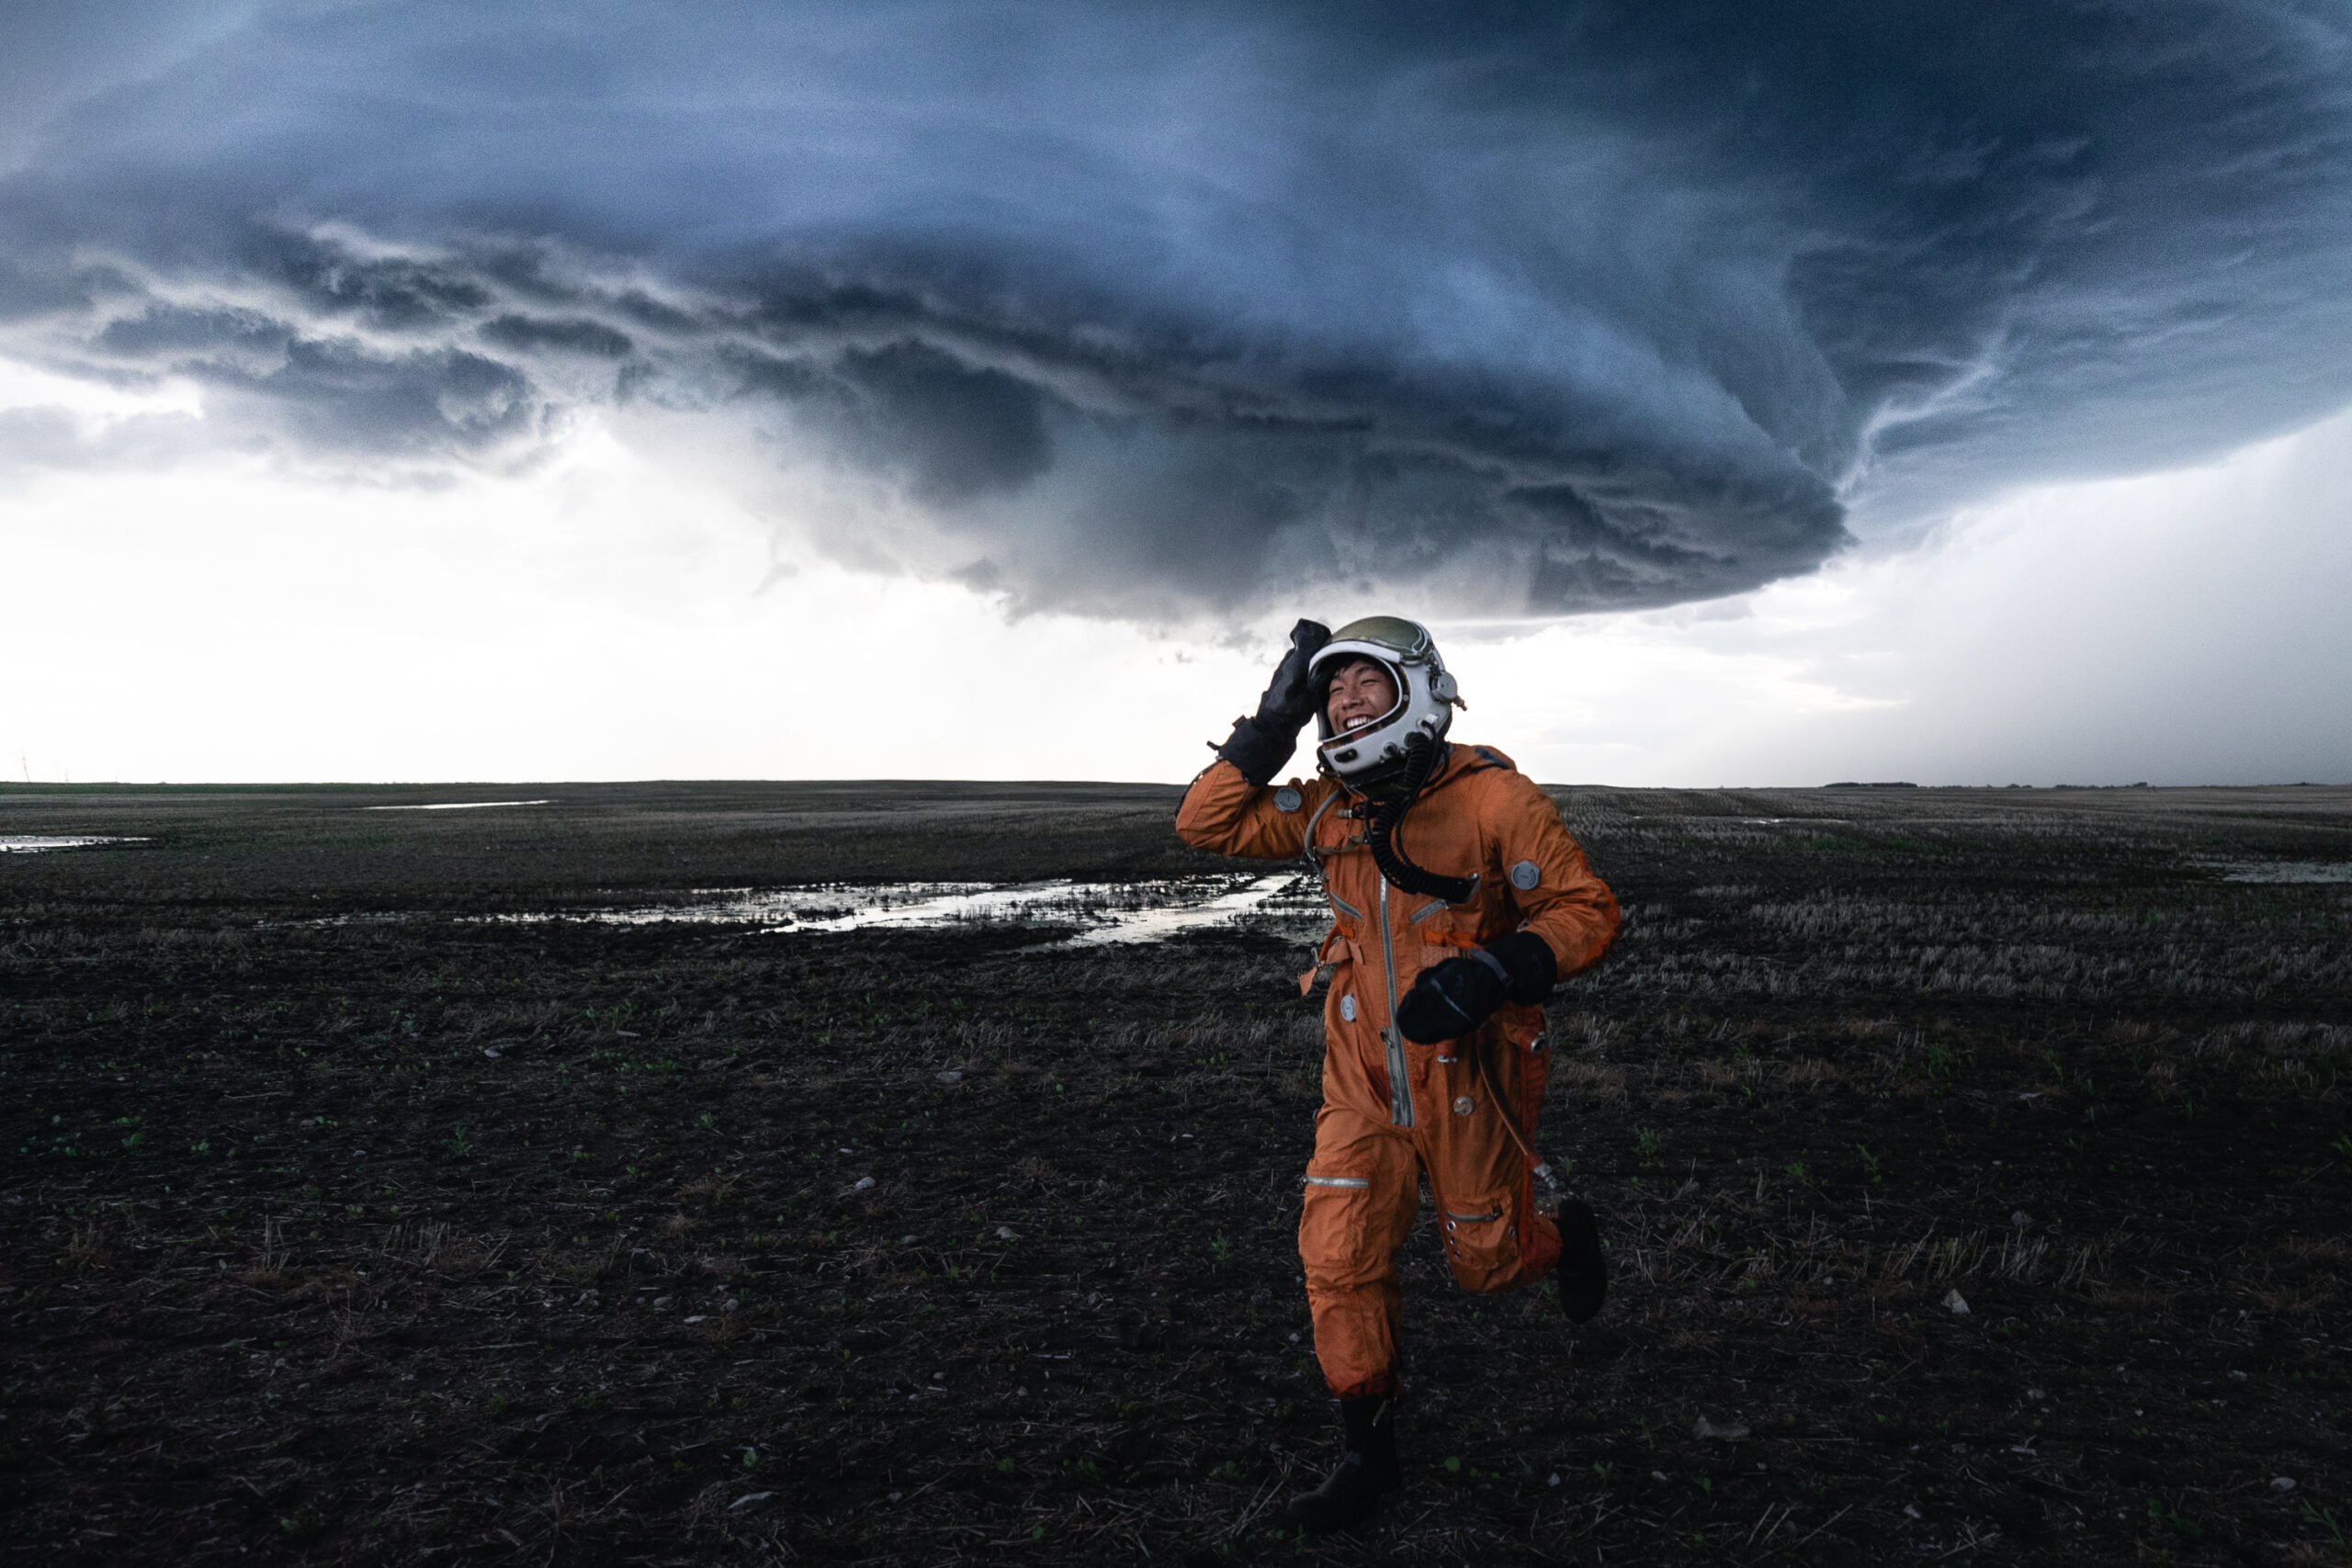 'Astronaut' Johnny Tran sprints back to the team vehicle to reposition and get ahead of the quickly approaching supercell.